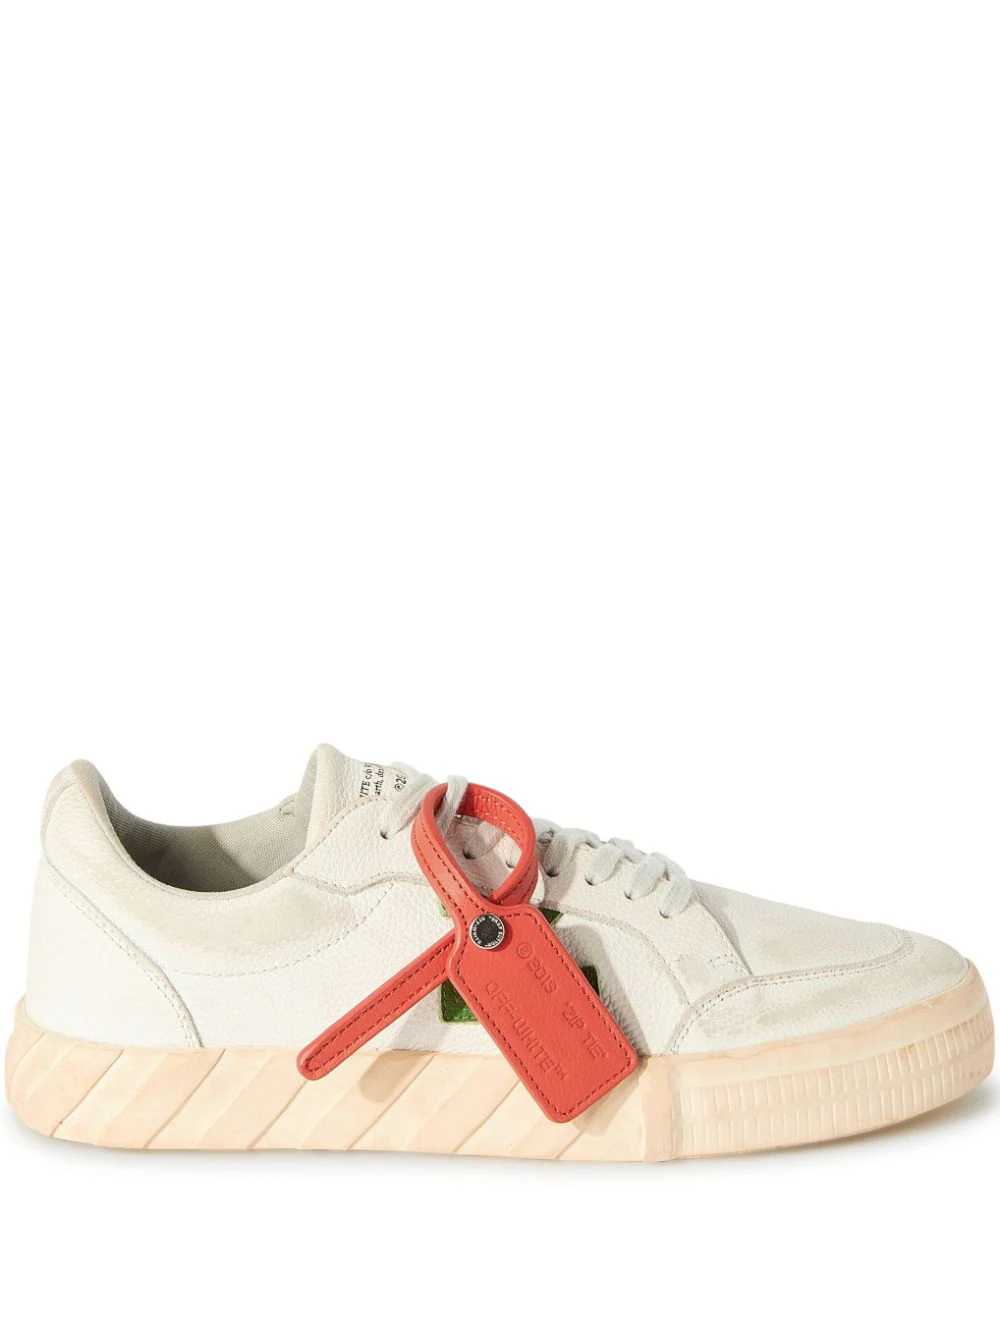 OFF-WHITE VULCANIZED SNEAKERS WITH WORN EFFECT